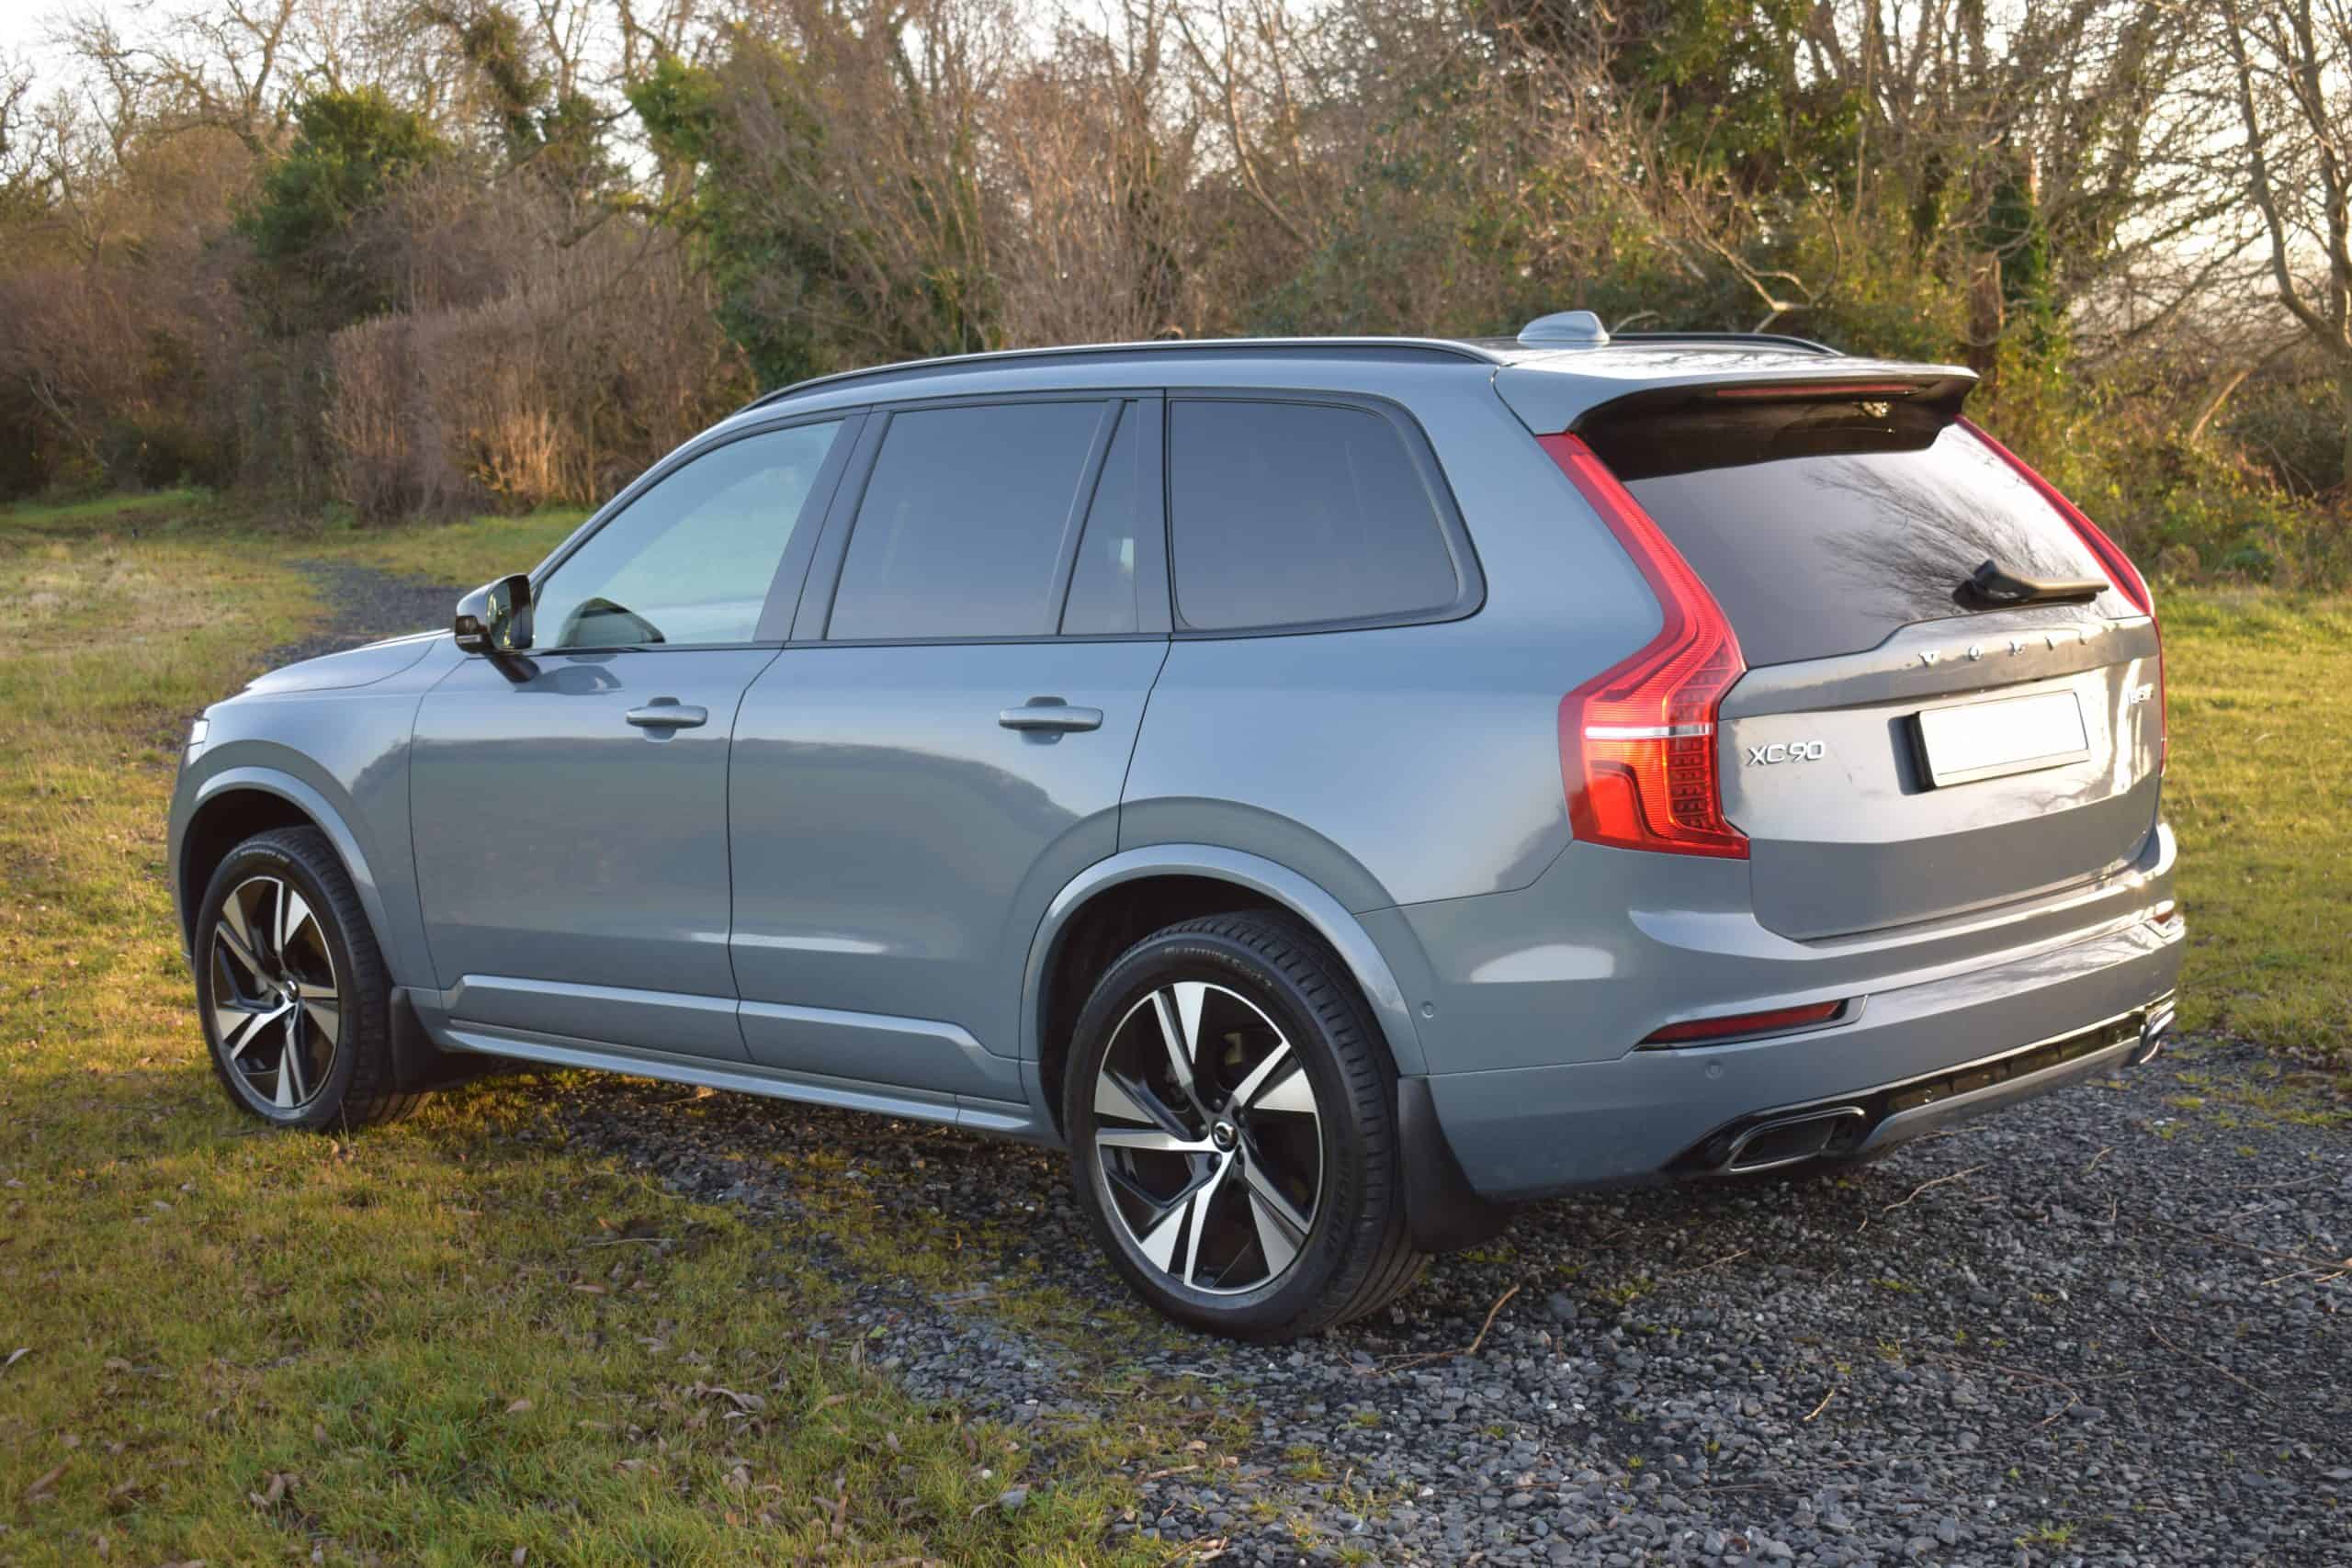 Volvo XC90 7-Seat SUV - Travel First Class. | Motoring Matters